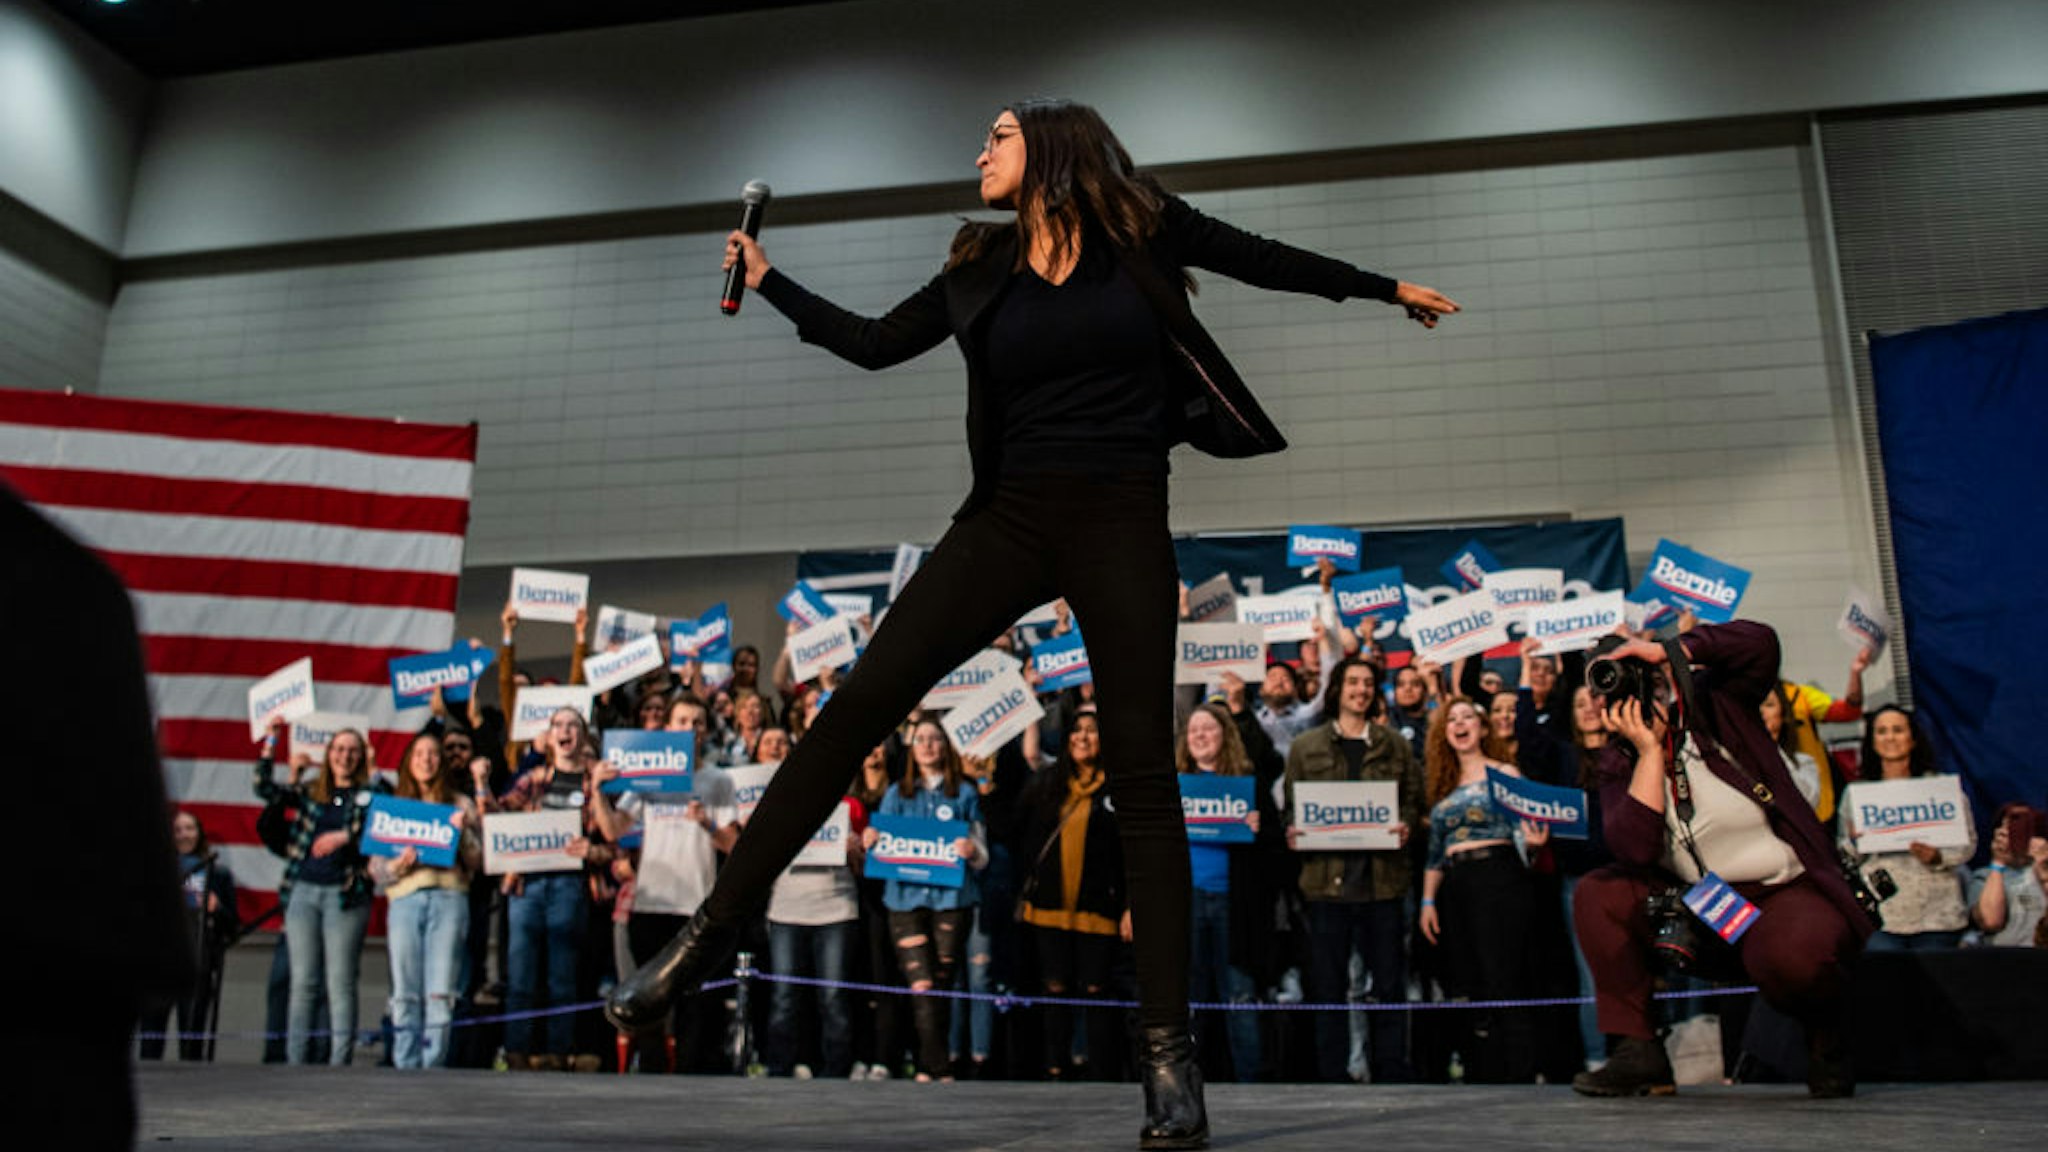 SIOUX CITY, IOWA - JANUARY 26: Alexandria Ocasio-Cortez, D-N.Y., dances on the stage ahead of Sen. Bernie Sanders, I-Vt., 2020 Democratic Presidential Candidate during a rally on Sunday, January 26, 2020 in Sioux City, Iowa. (Photo by